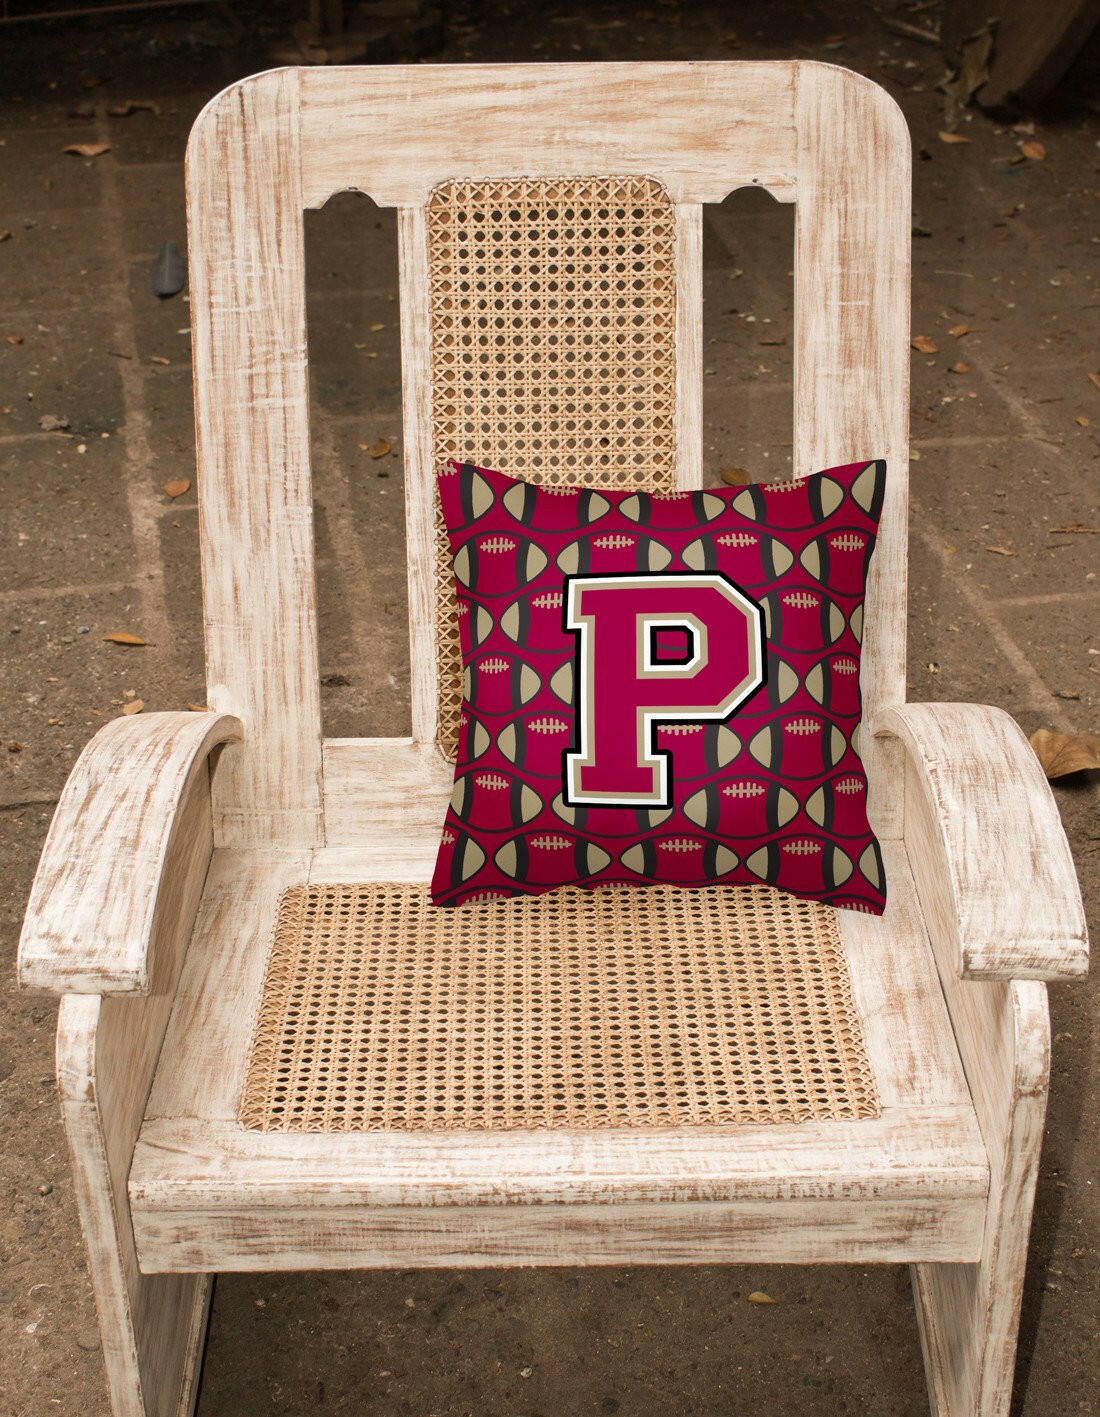 Letter P Football Garnet and Gold Fabric Decorative Pillow CJ1078-PPW1414 by Caroline's Treasures